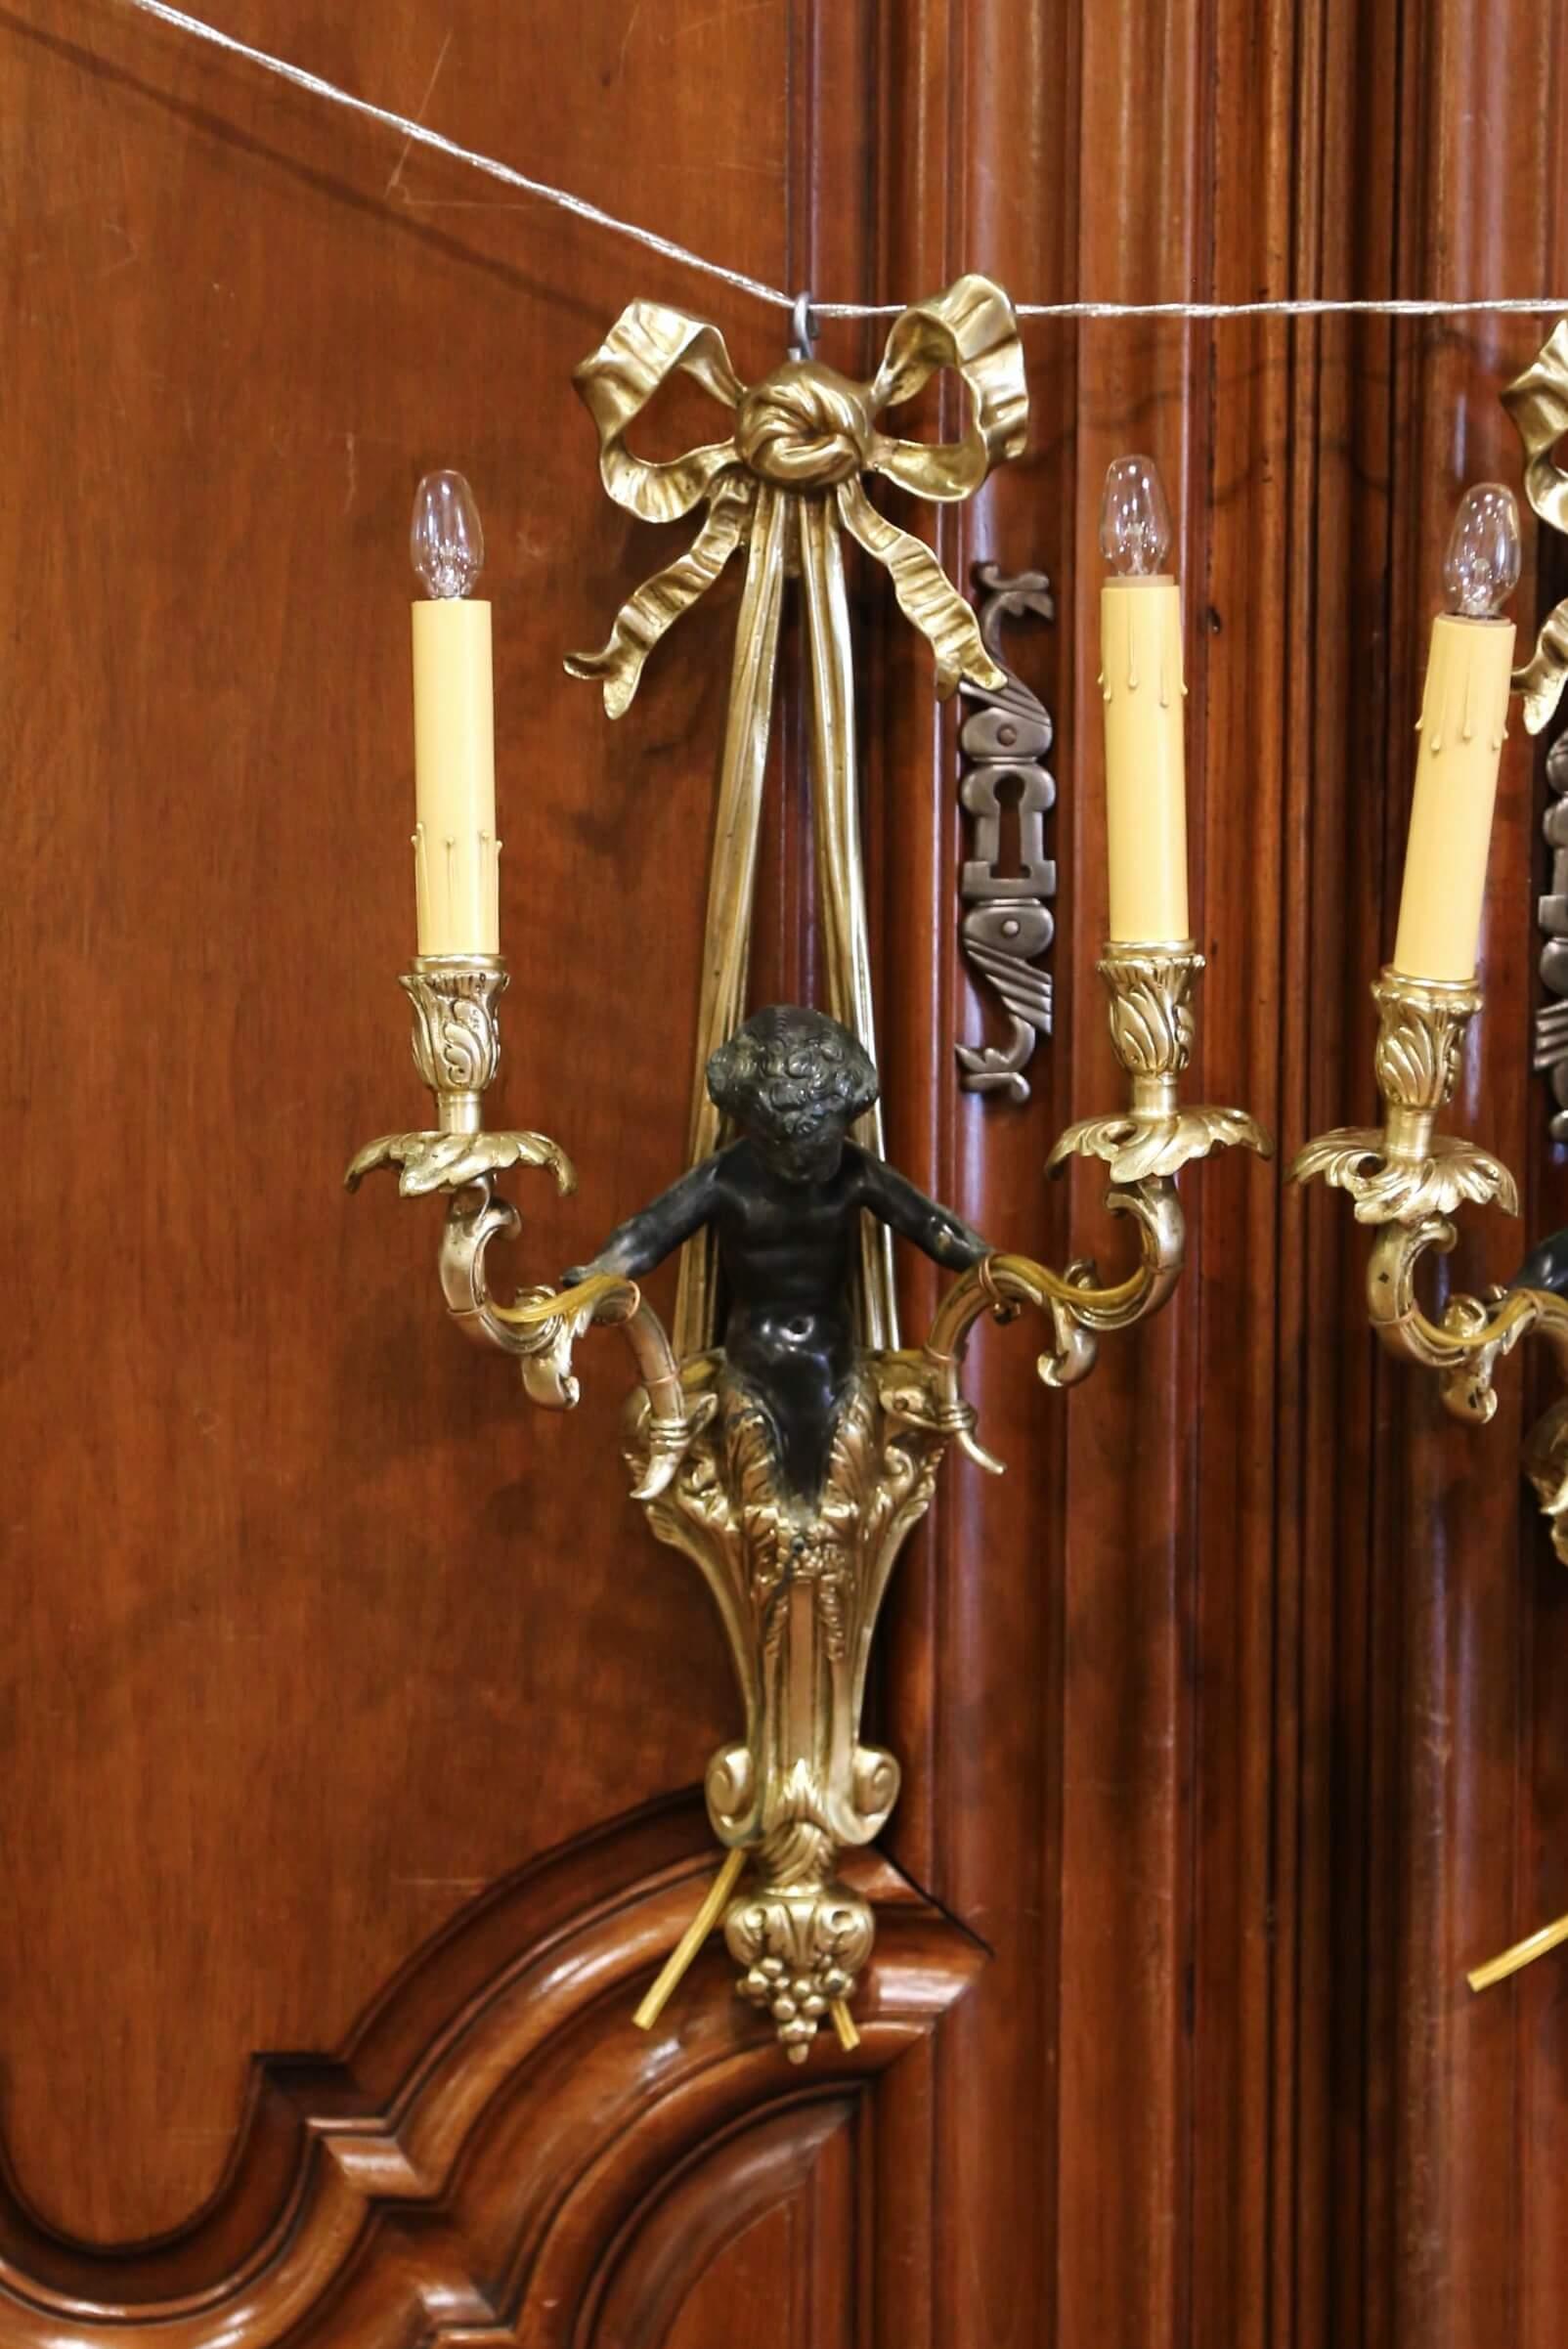 Hand-Crafted Pair of Mid-19th Century French Louis XVI Bronze Dore Wall Sconces with Cherubs